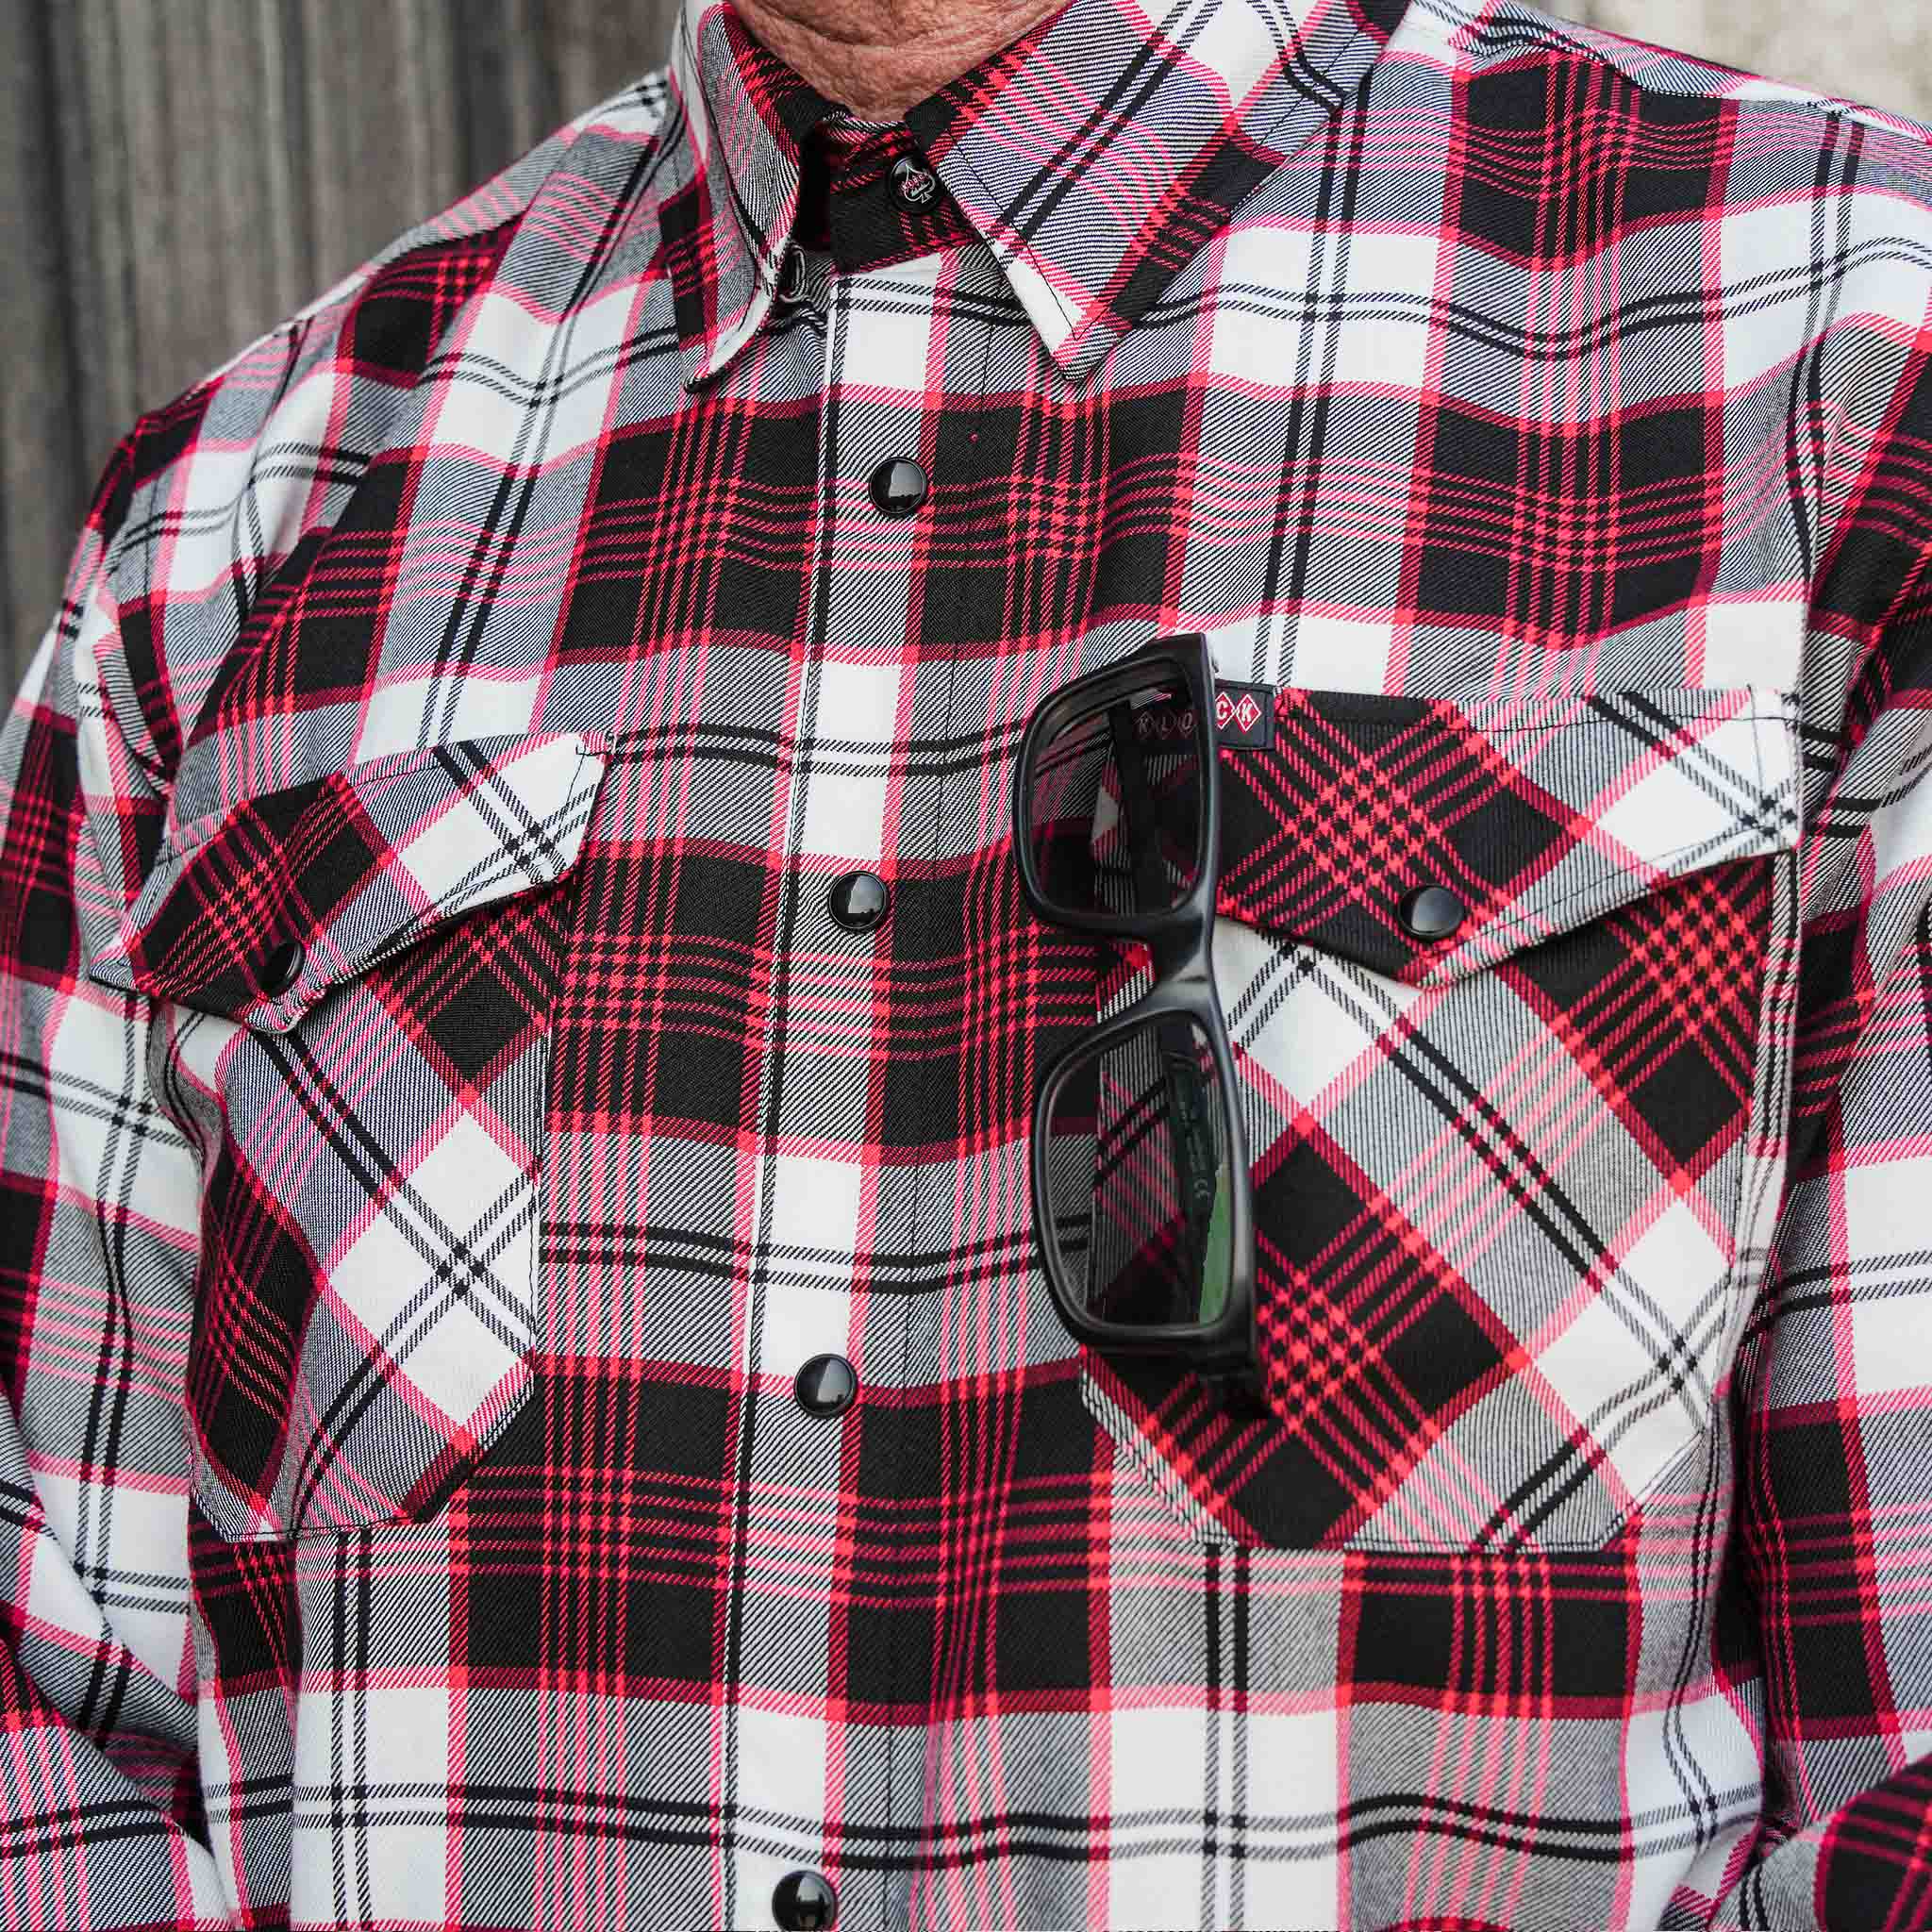 Klock Werks x Dixxon 25th Anniversary Flannel with dual button down flap chest pockets with utility slot for pens, sunglasses, etc.(Dual button down flap chest pockets with utility slot for pens, sunglasses, etc.)